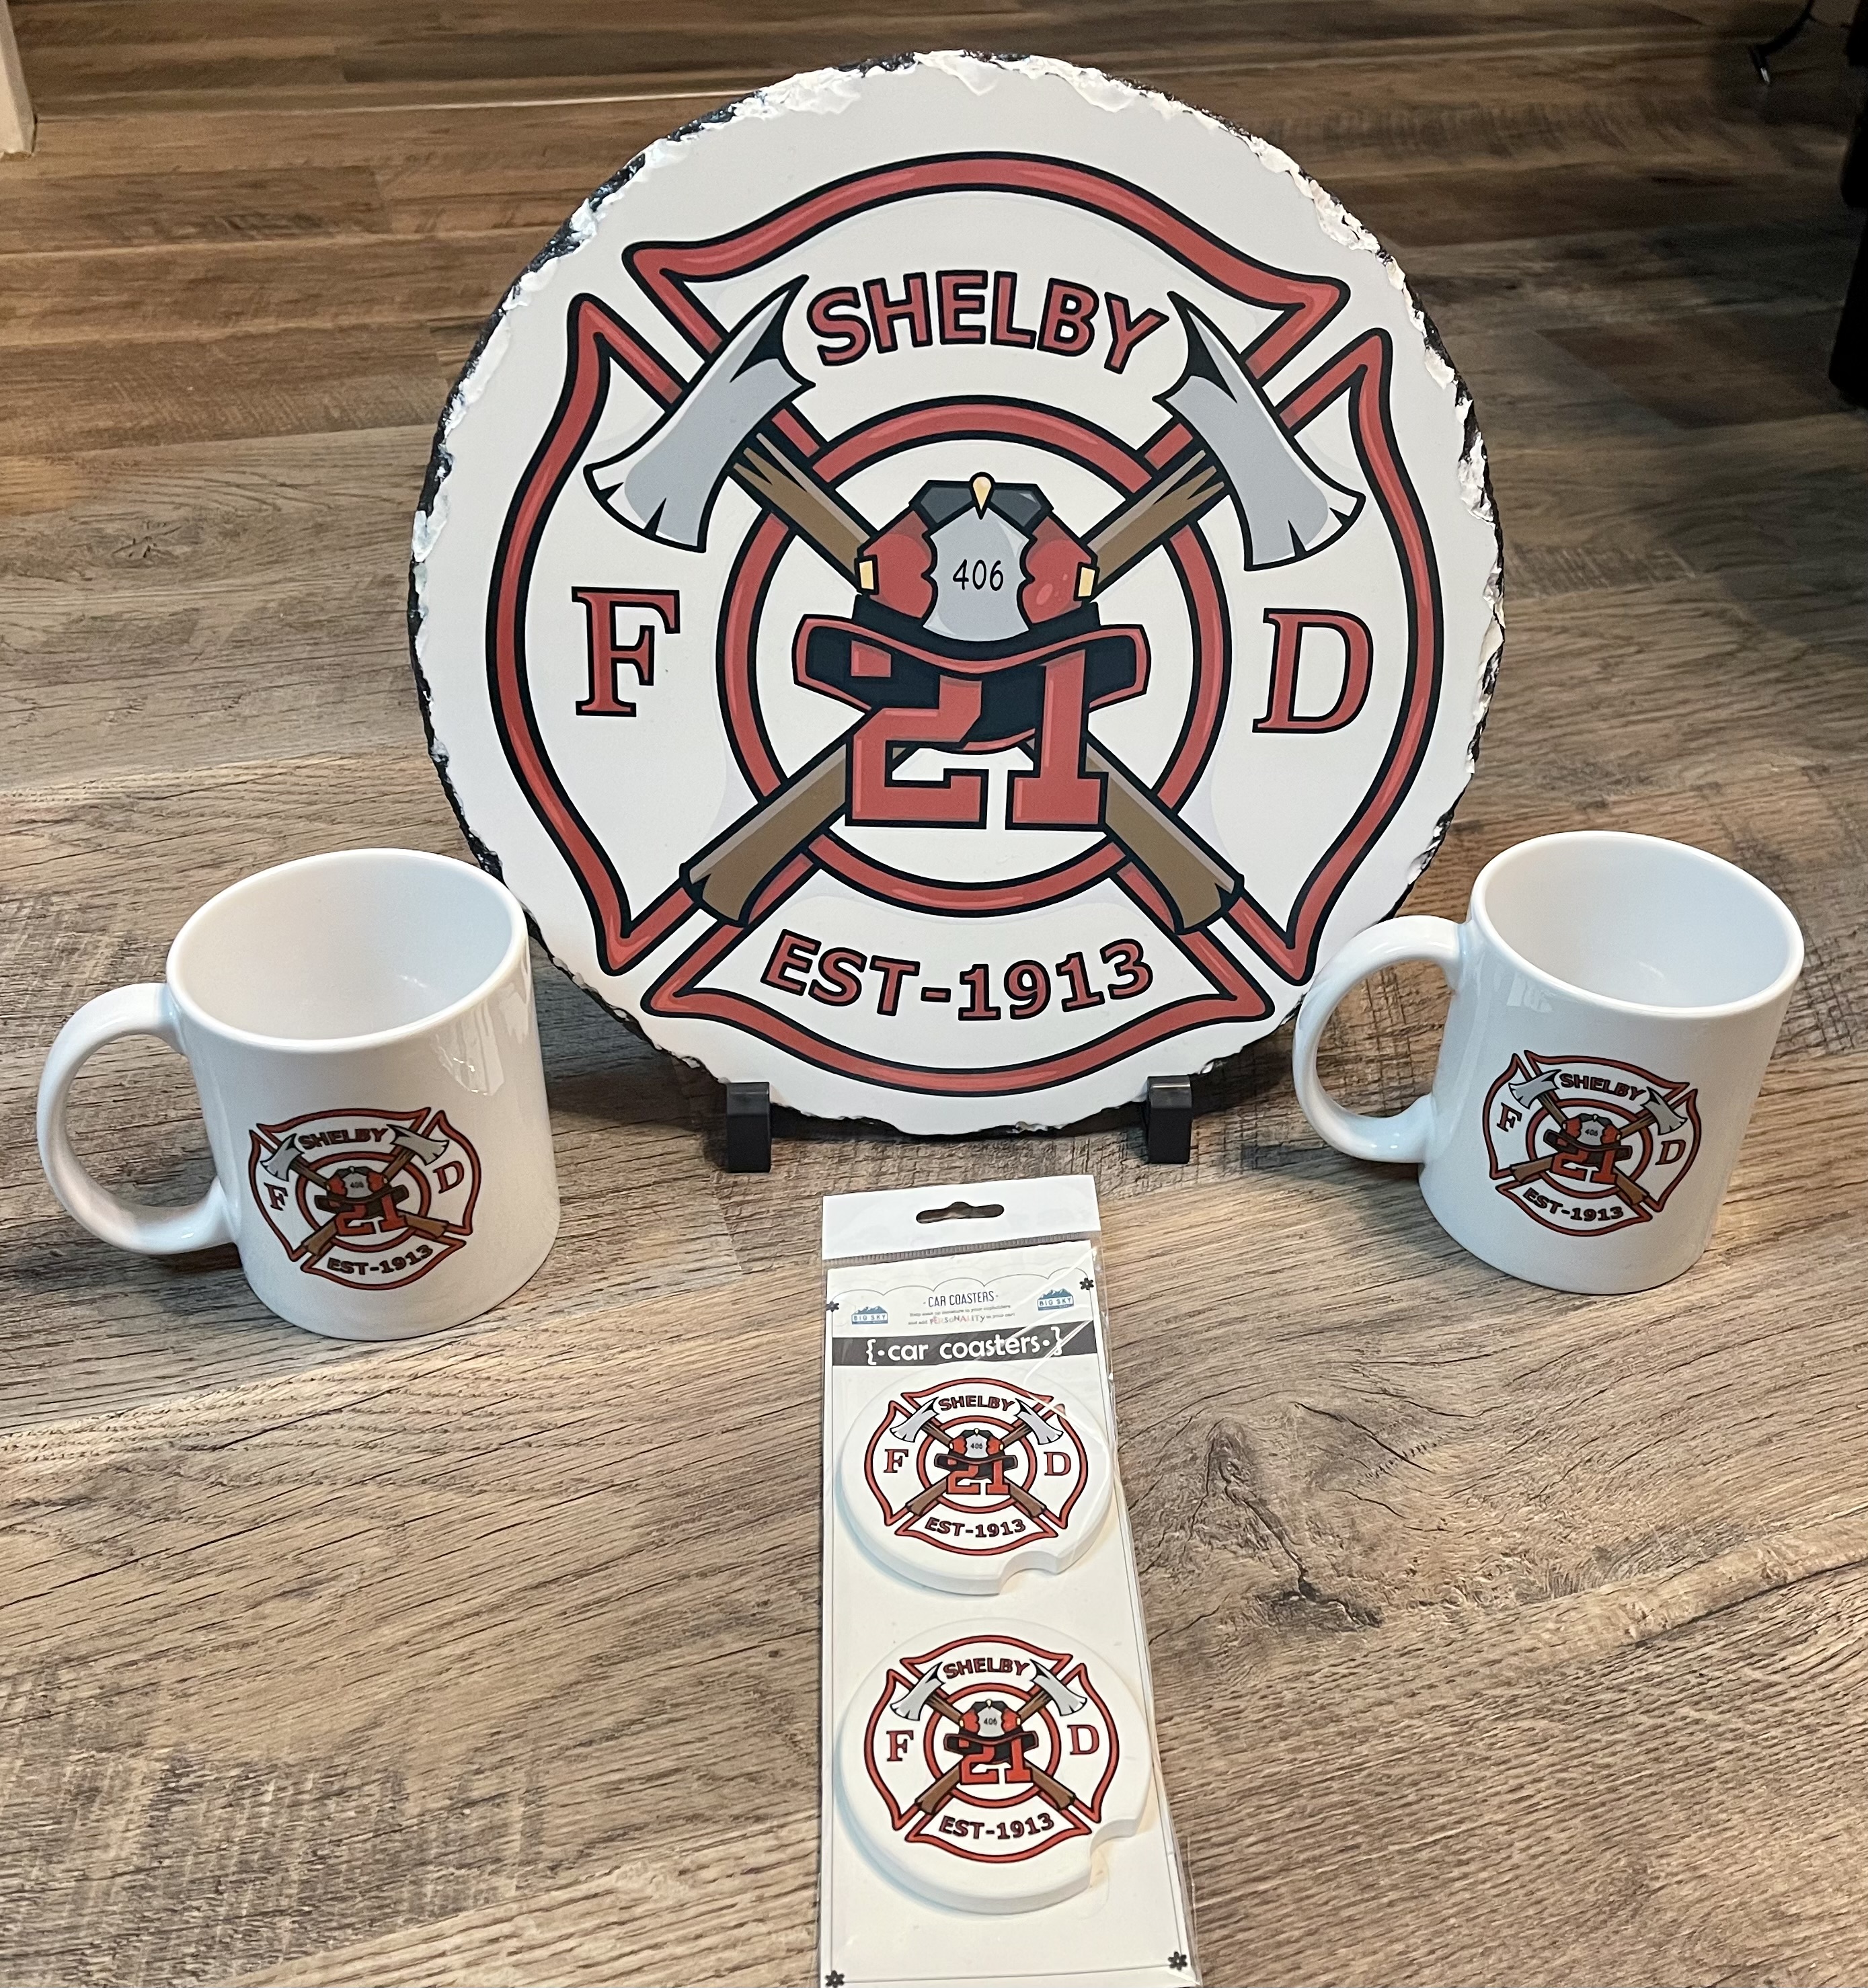 Our local volunteer fire department hosts a golf tournament each year and we donated this bundl